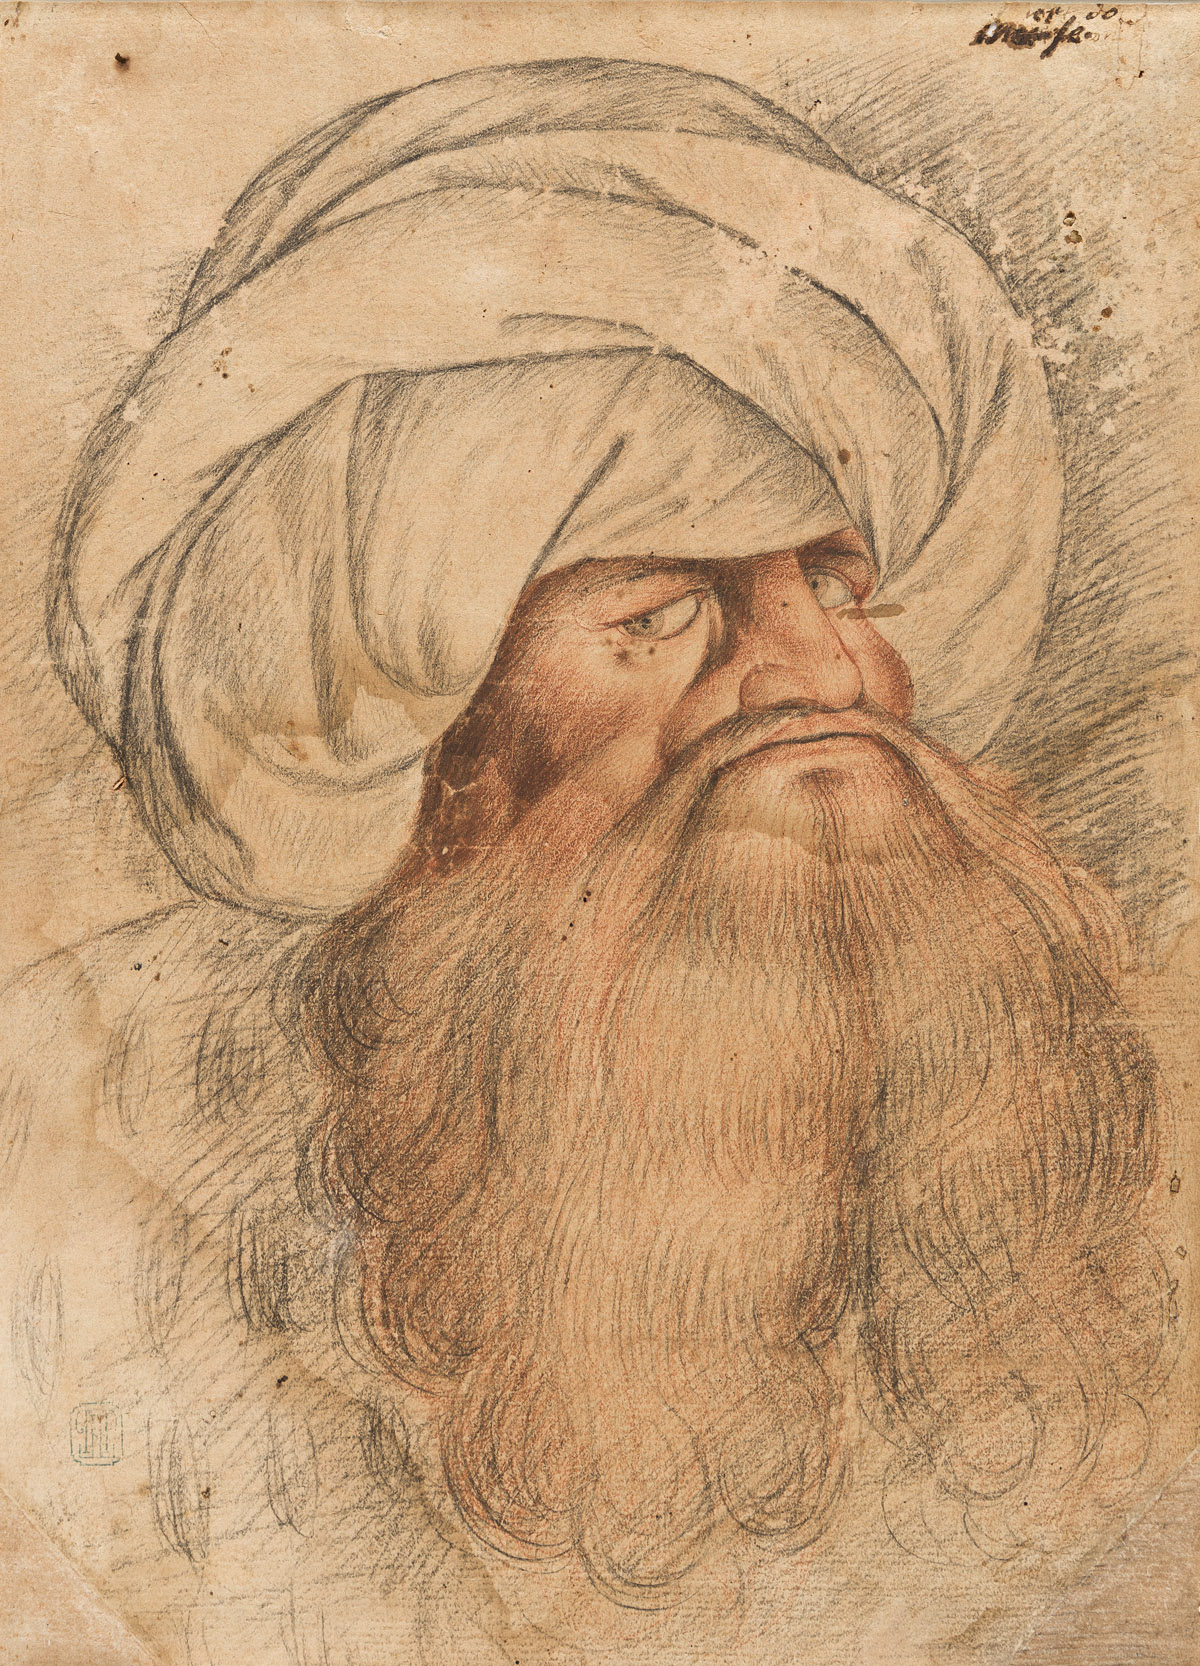 VENETIAN SCHOOL, LATE 16TH/EARLY 17TH CENTURY Portrait of an Ottoman Turkish Man with a Flowing Beard.